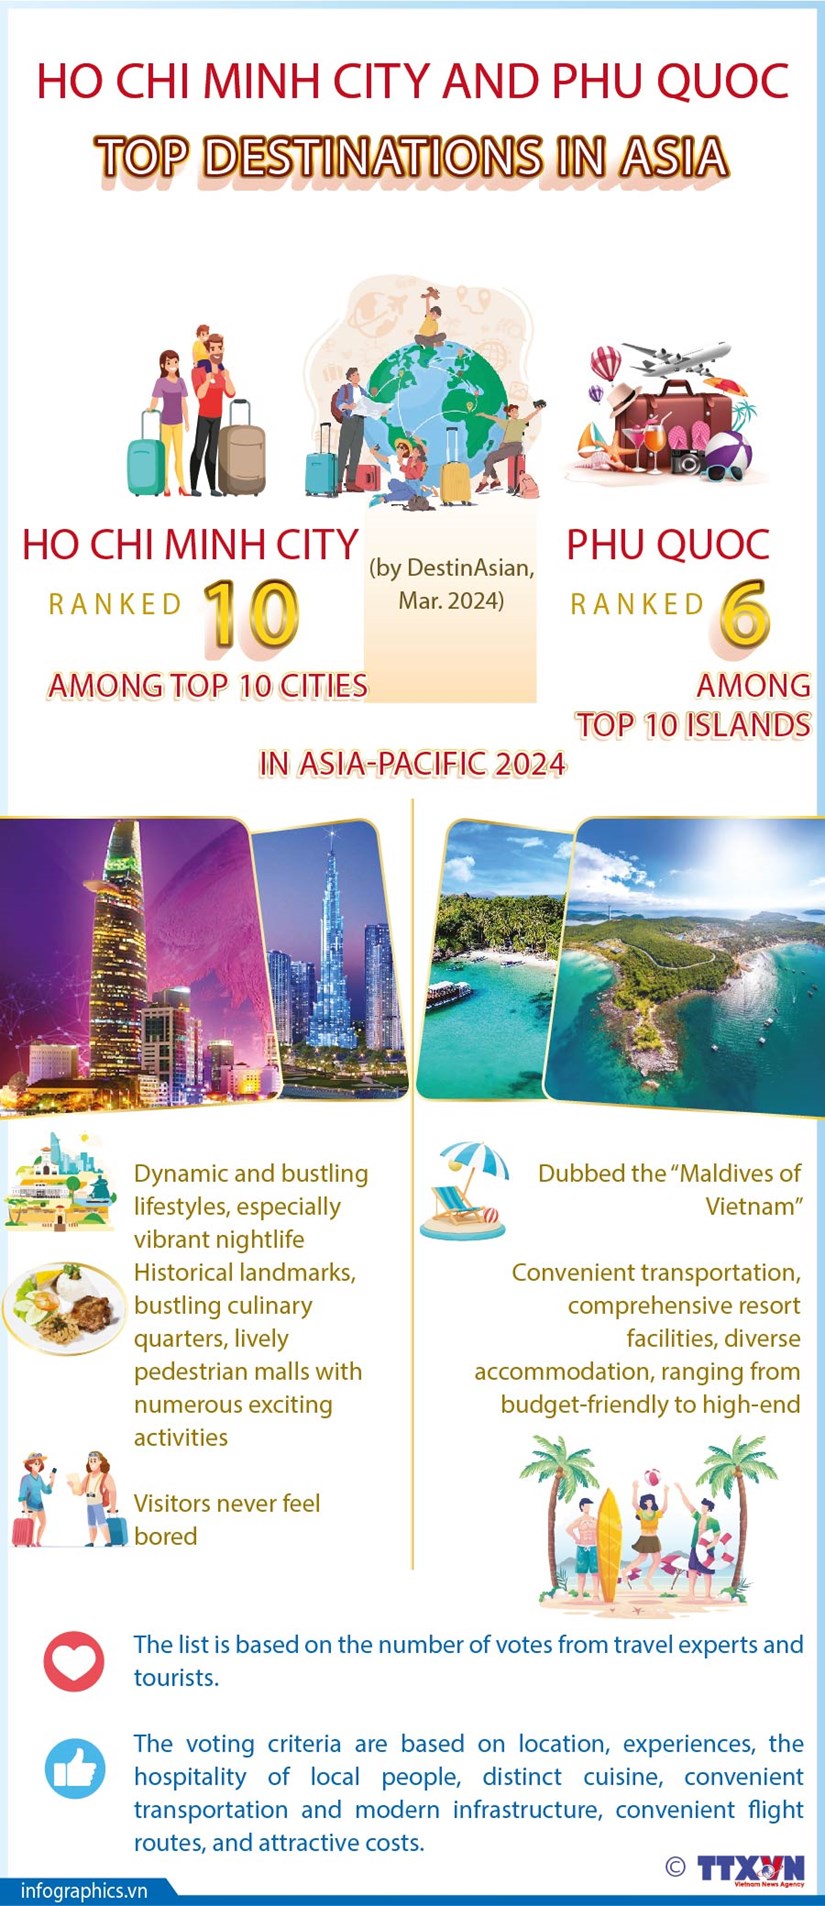 HCMC, Phu Quoc rank among Asia’s best destinations hinh anh 1